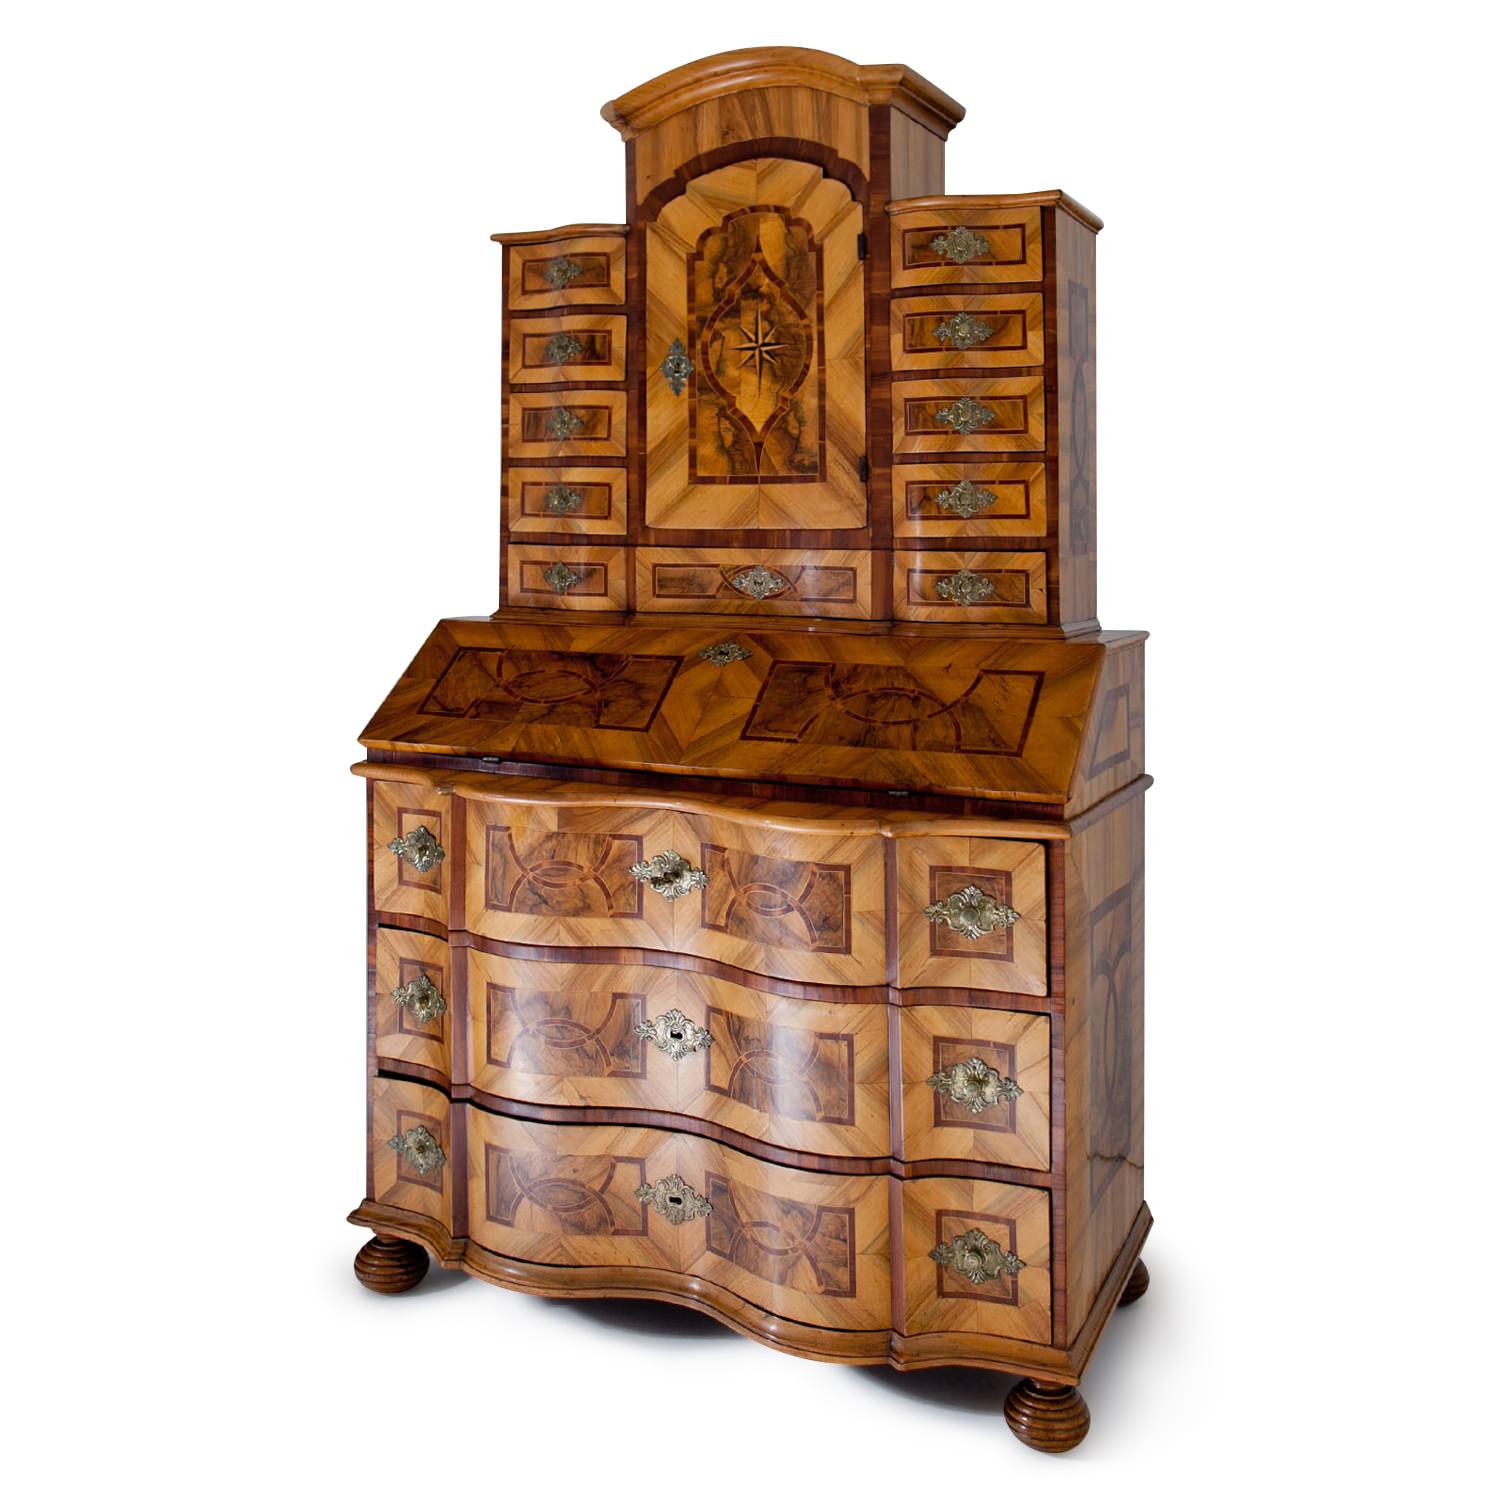 Baroque Tabernacle Secretaire on grooved ball feet with a three-drawered commode bottom  part with a serpentine front, a slanted writing surface and a tabernacle top with a segment pediment and several drawers. Very beautiful walnut veneer. The